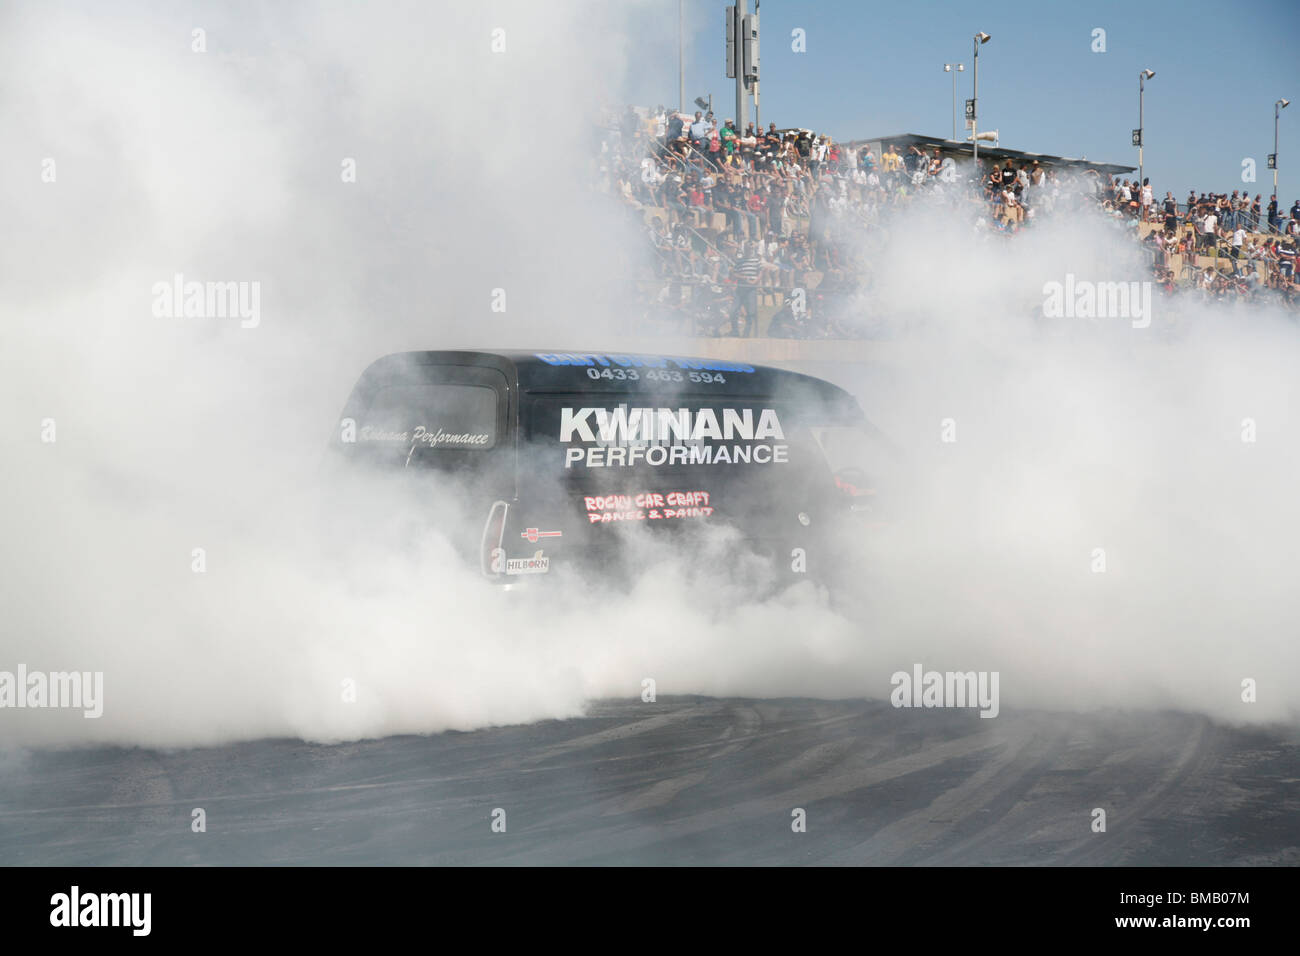 Iconic Australian Holden panel van performing a monster of a tire smoking burnout at the Perth Motorplex drag racing venue Stock Photo